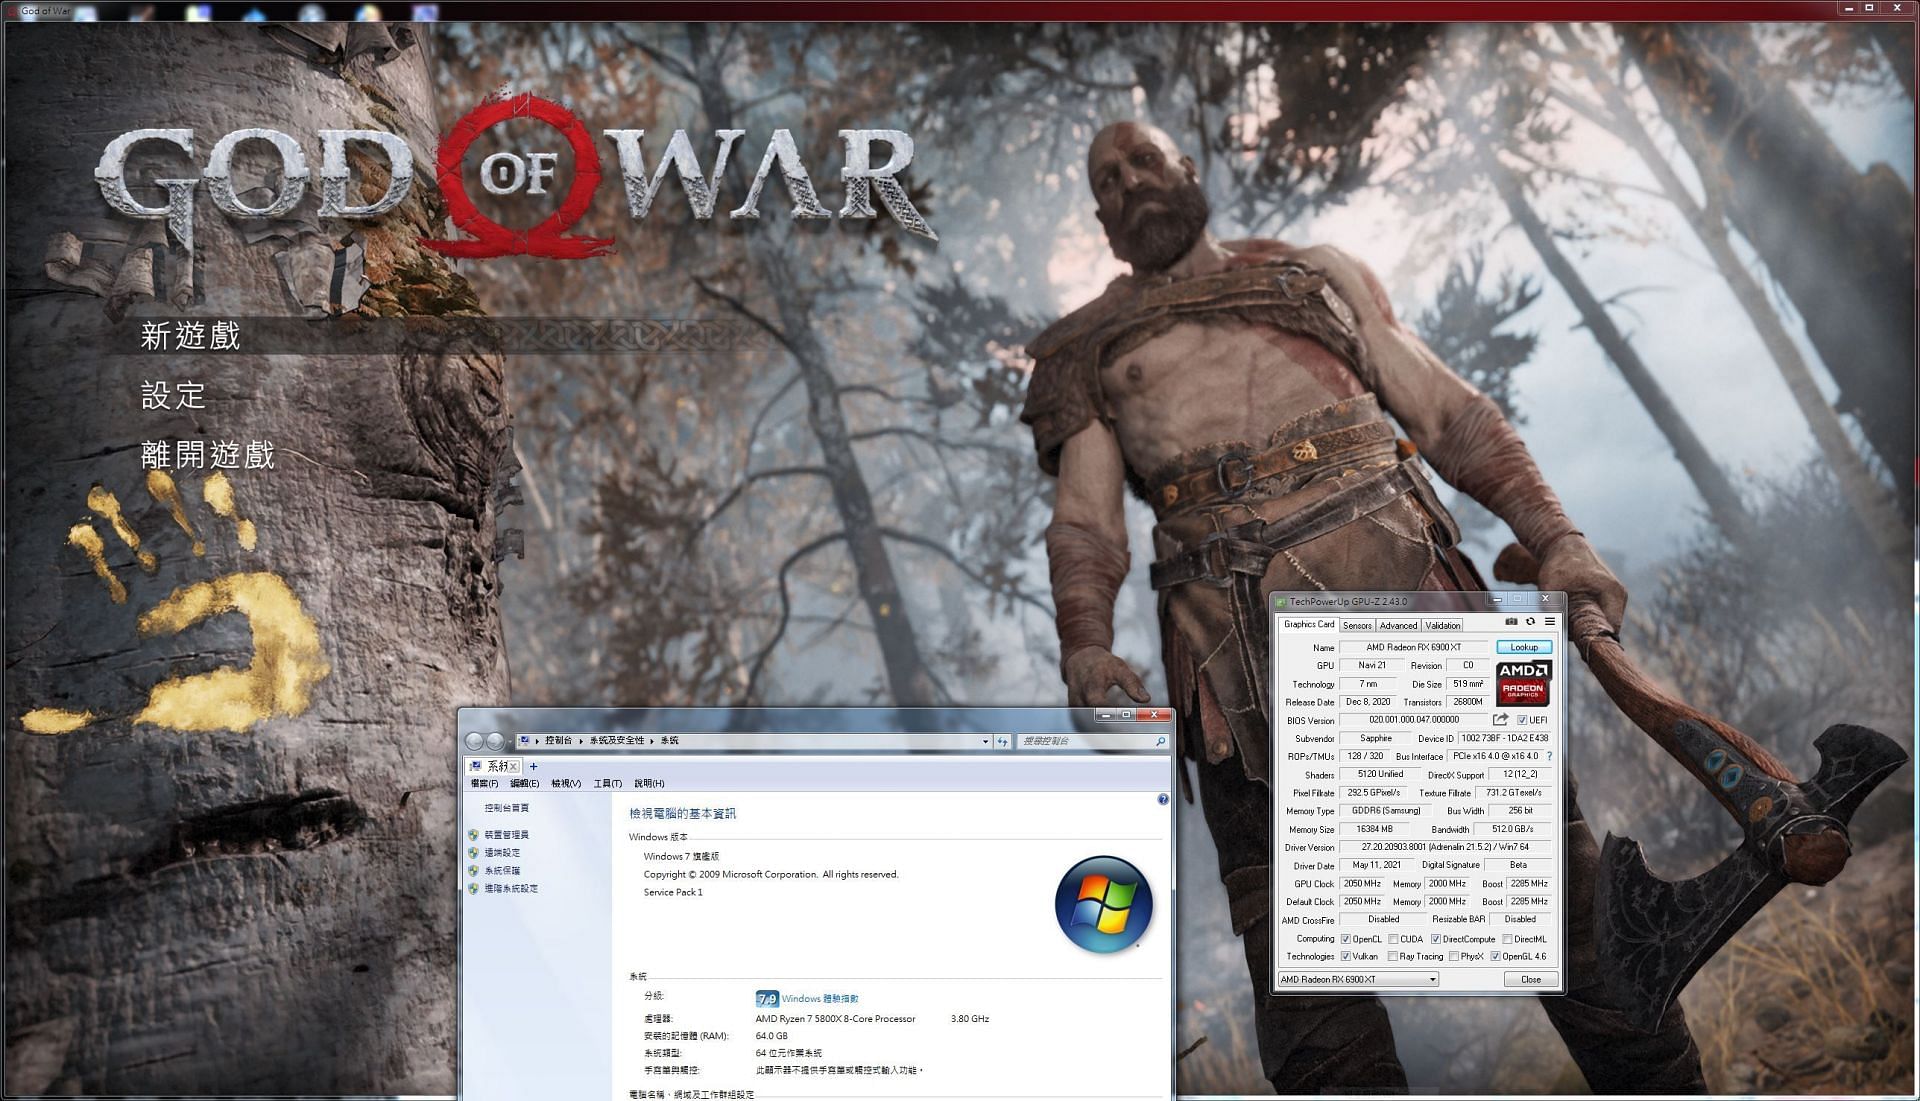 You can now play God of War on Windows 7, 8 and 8.1 thanks to modders